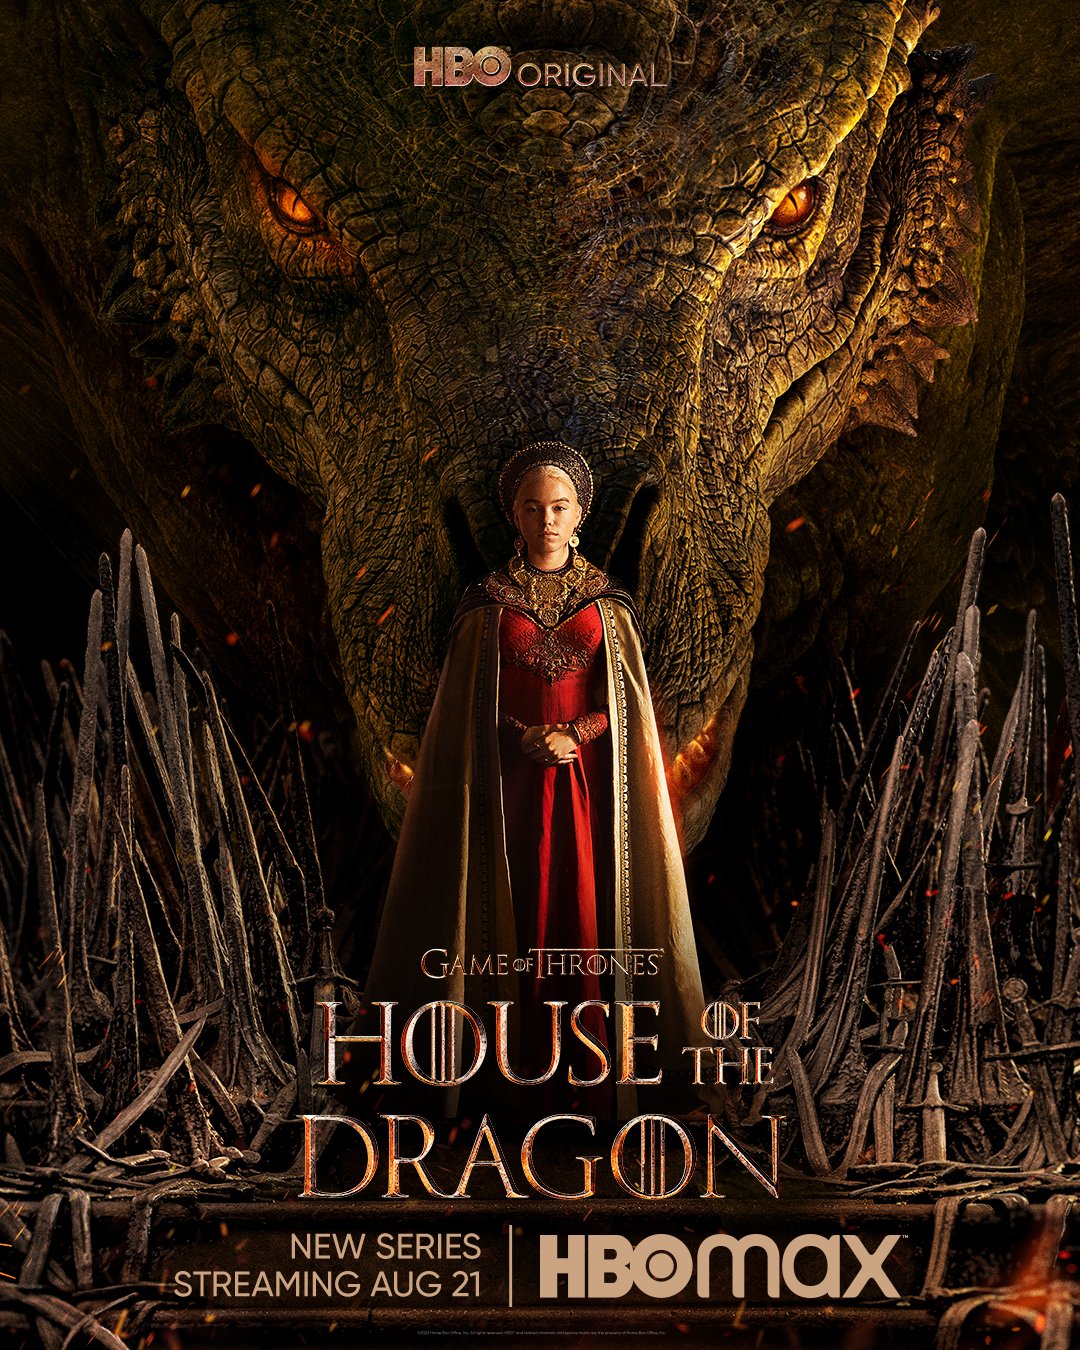 House of the Dragon Trailer & Poster